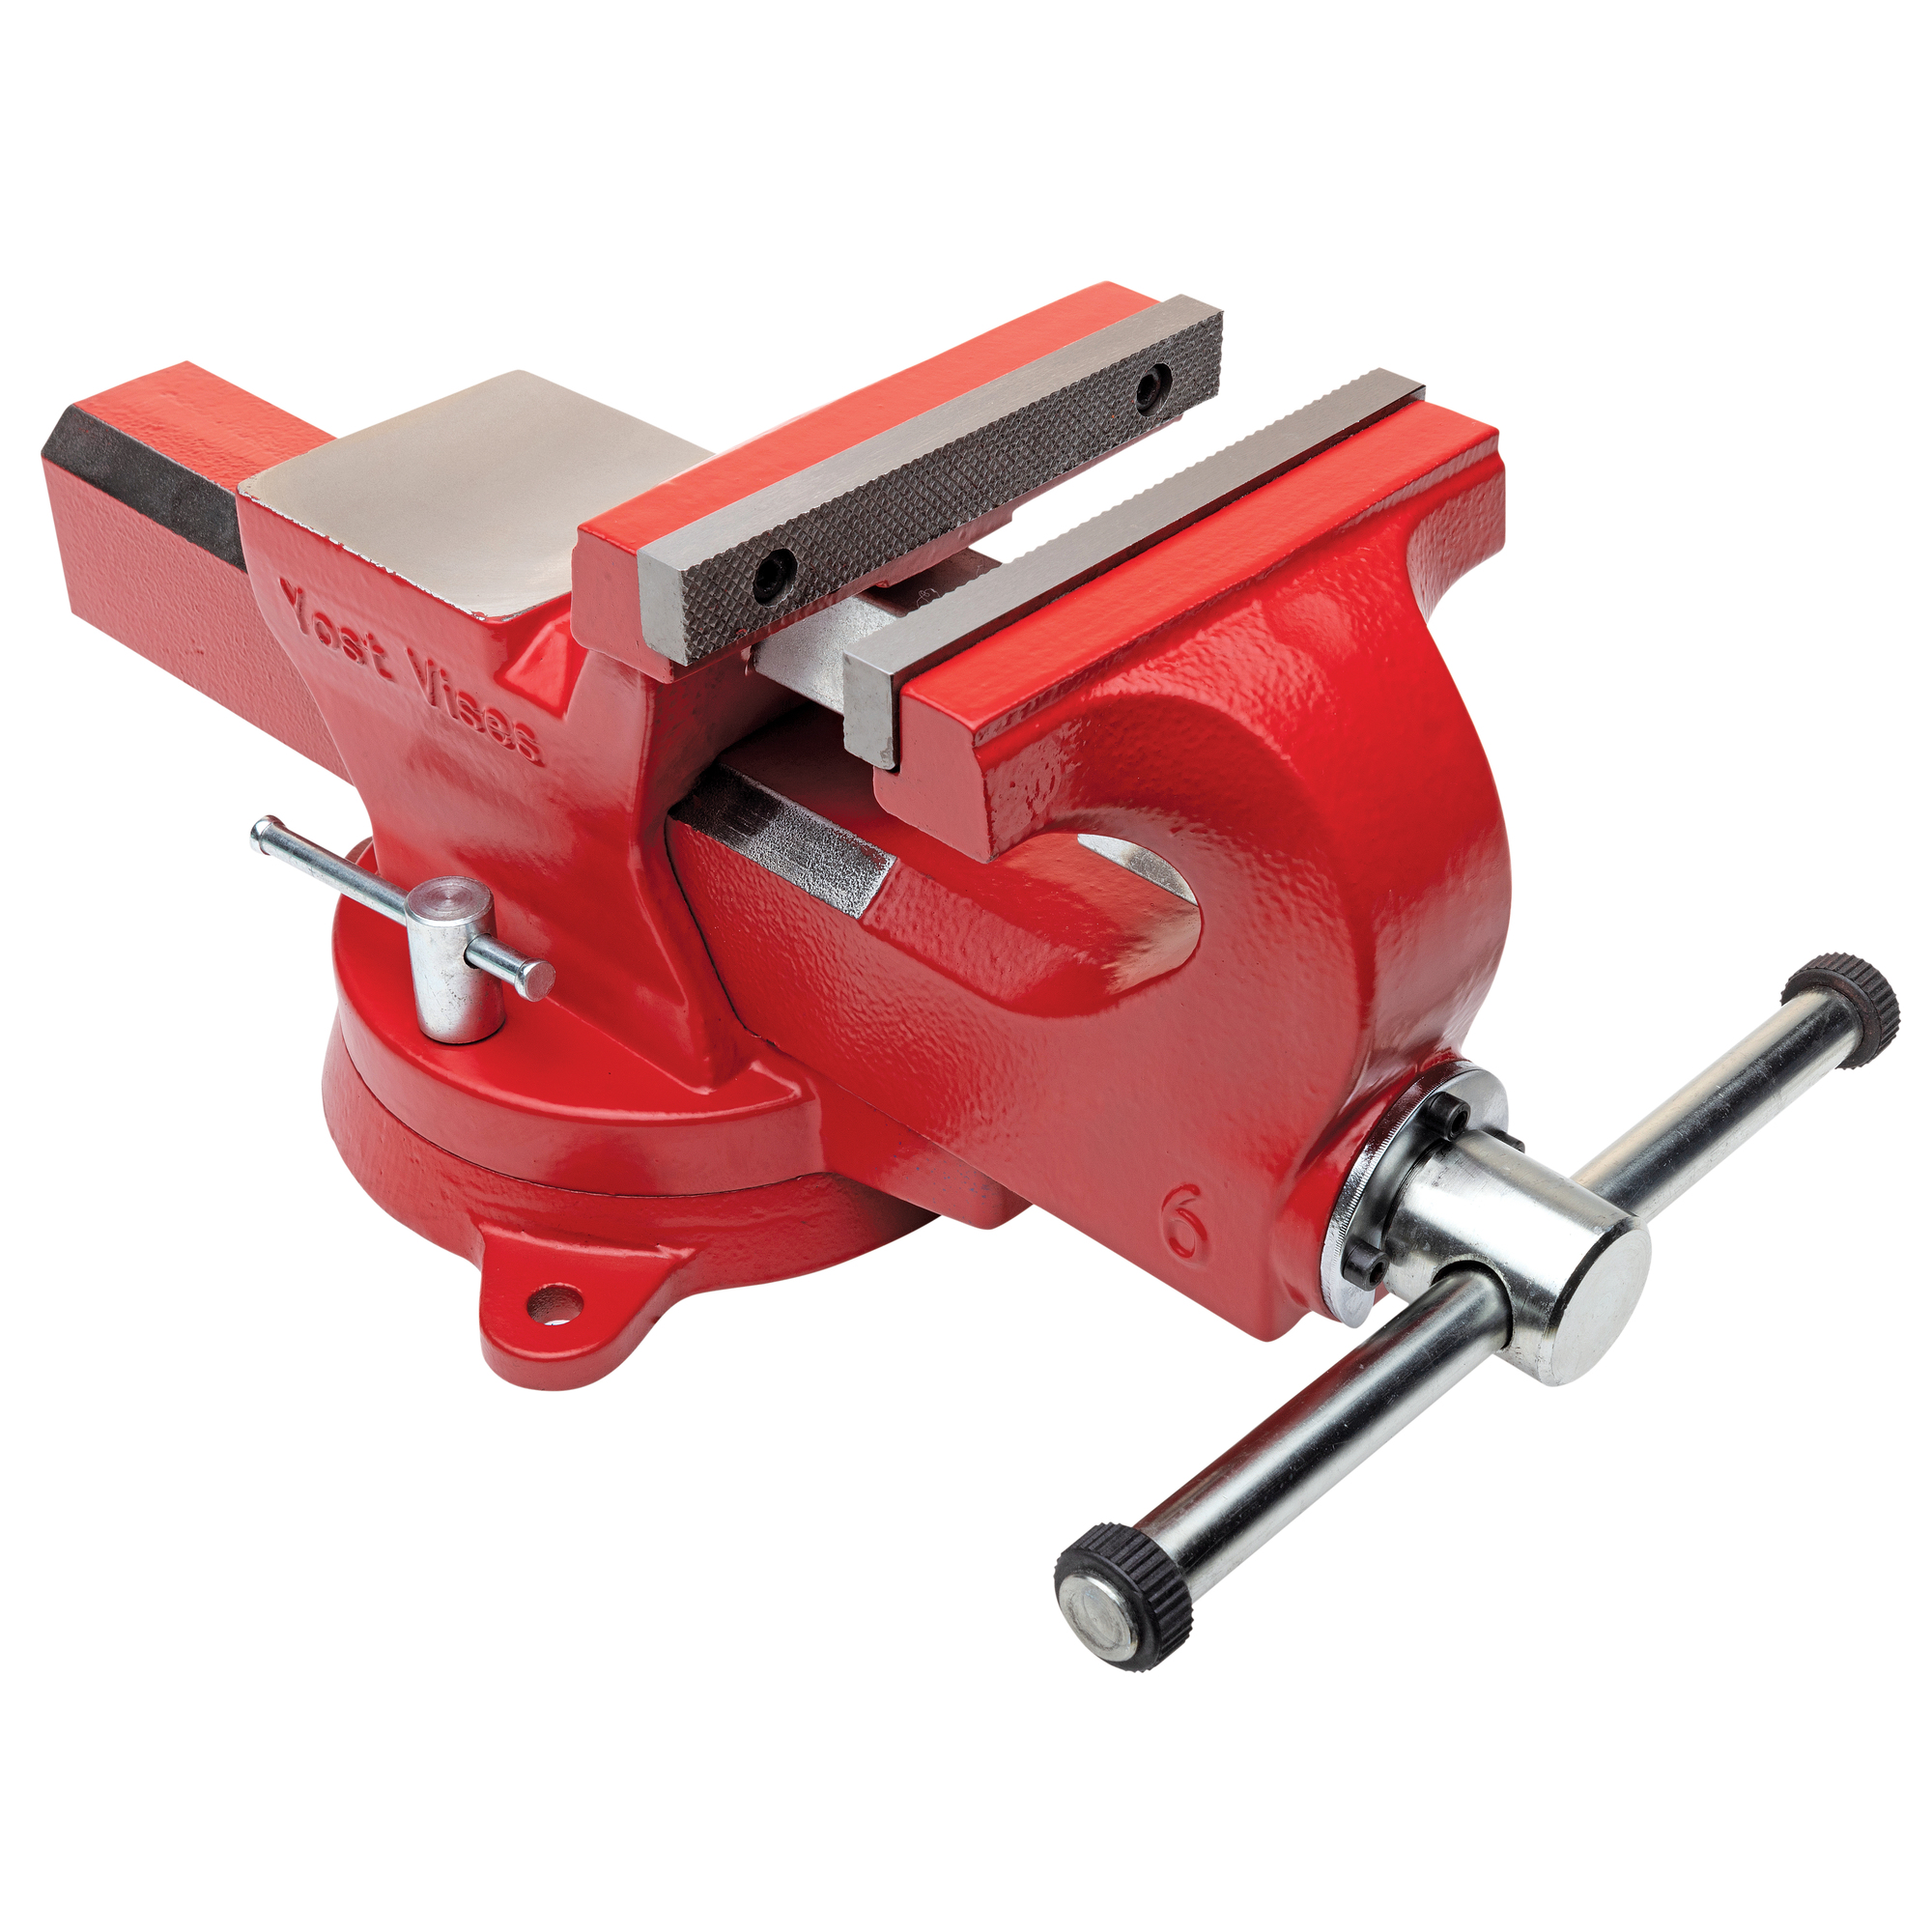 Yost Vises, 6Inch Bench Vise, Jaw Width 6 in, Jaw Capacity 7.875 in, Material Ductile Iron, Model ADI-6